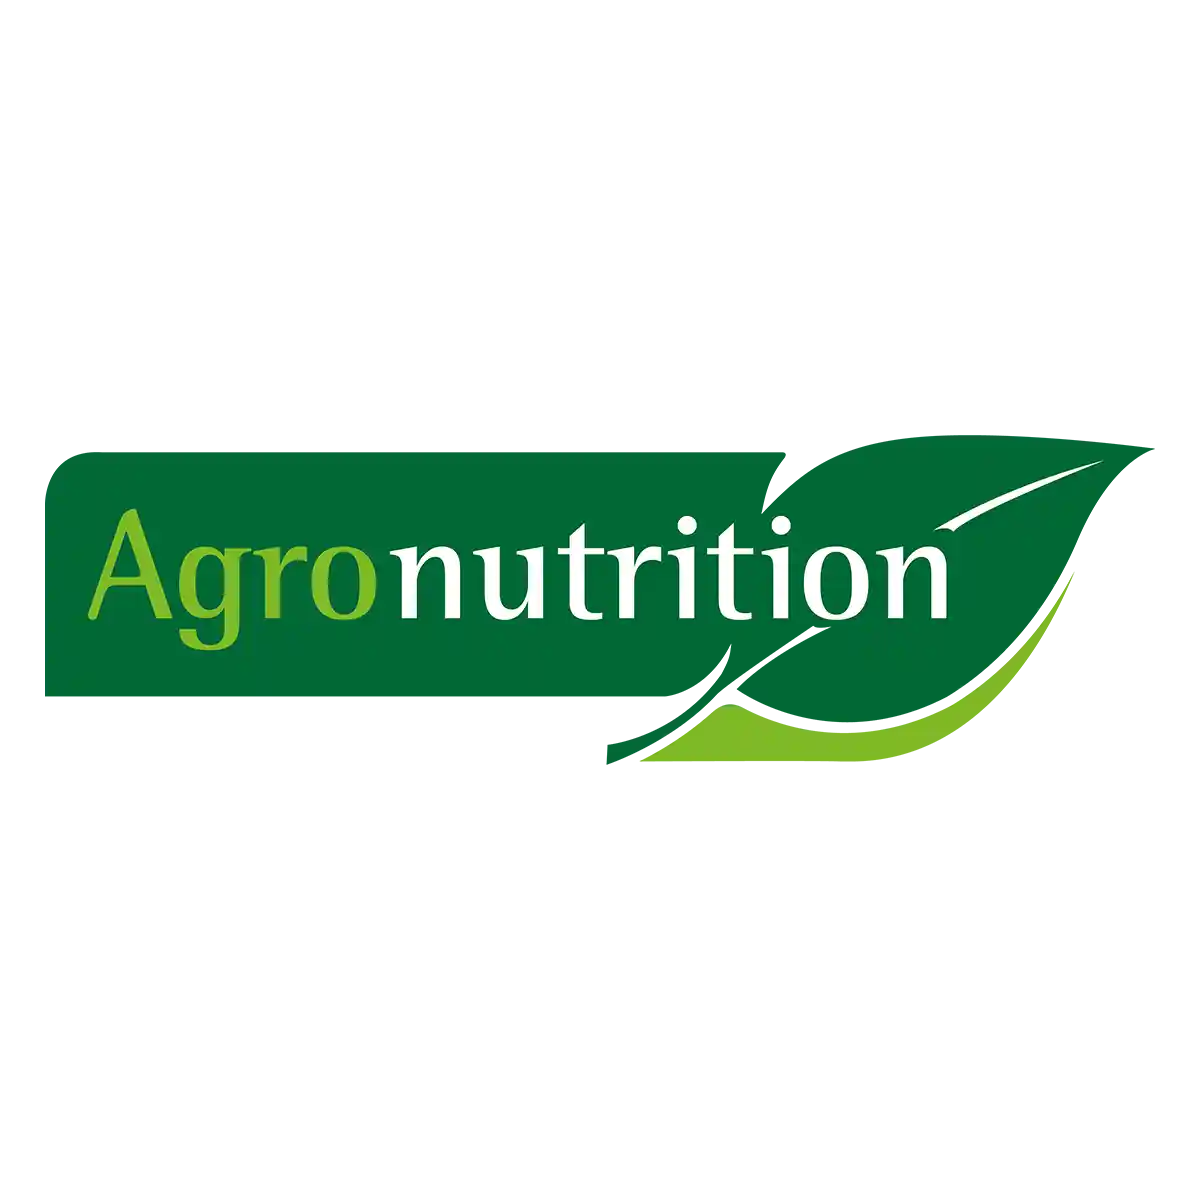 A leader in France, Agronutrition is fully dedicated to plant nutrition and to the optimisation of agricultural production. Armed with over 55 years of solid experience, our teams have been designing innovative solutions since 1969 that ensure adapted and targeted nutrition from planting to harvest.